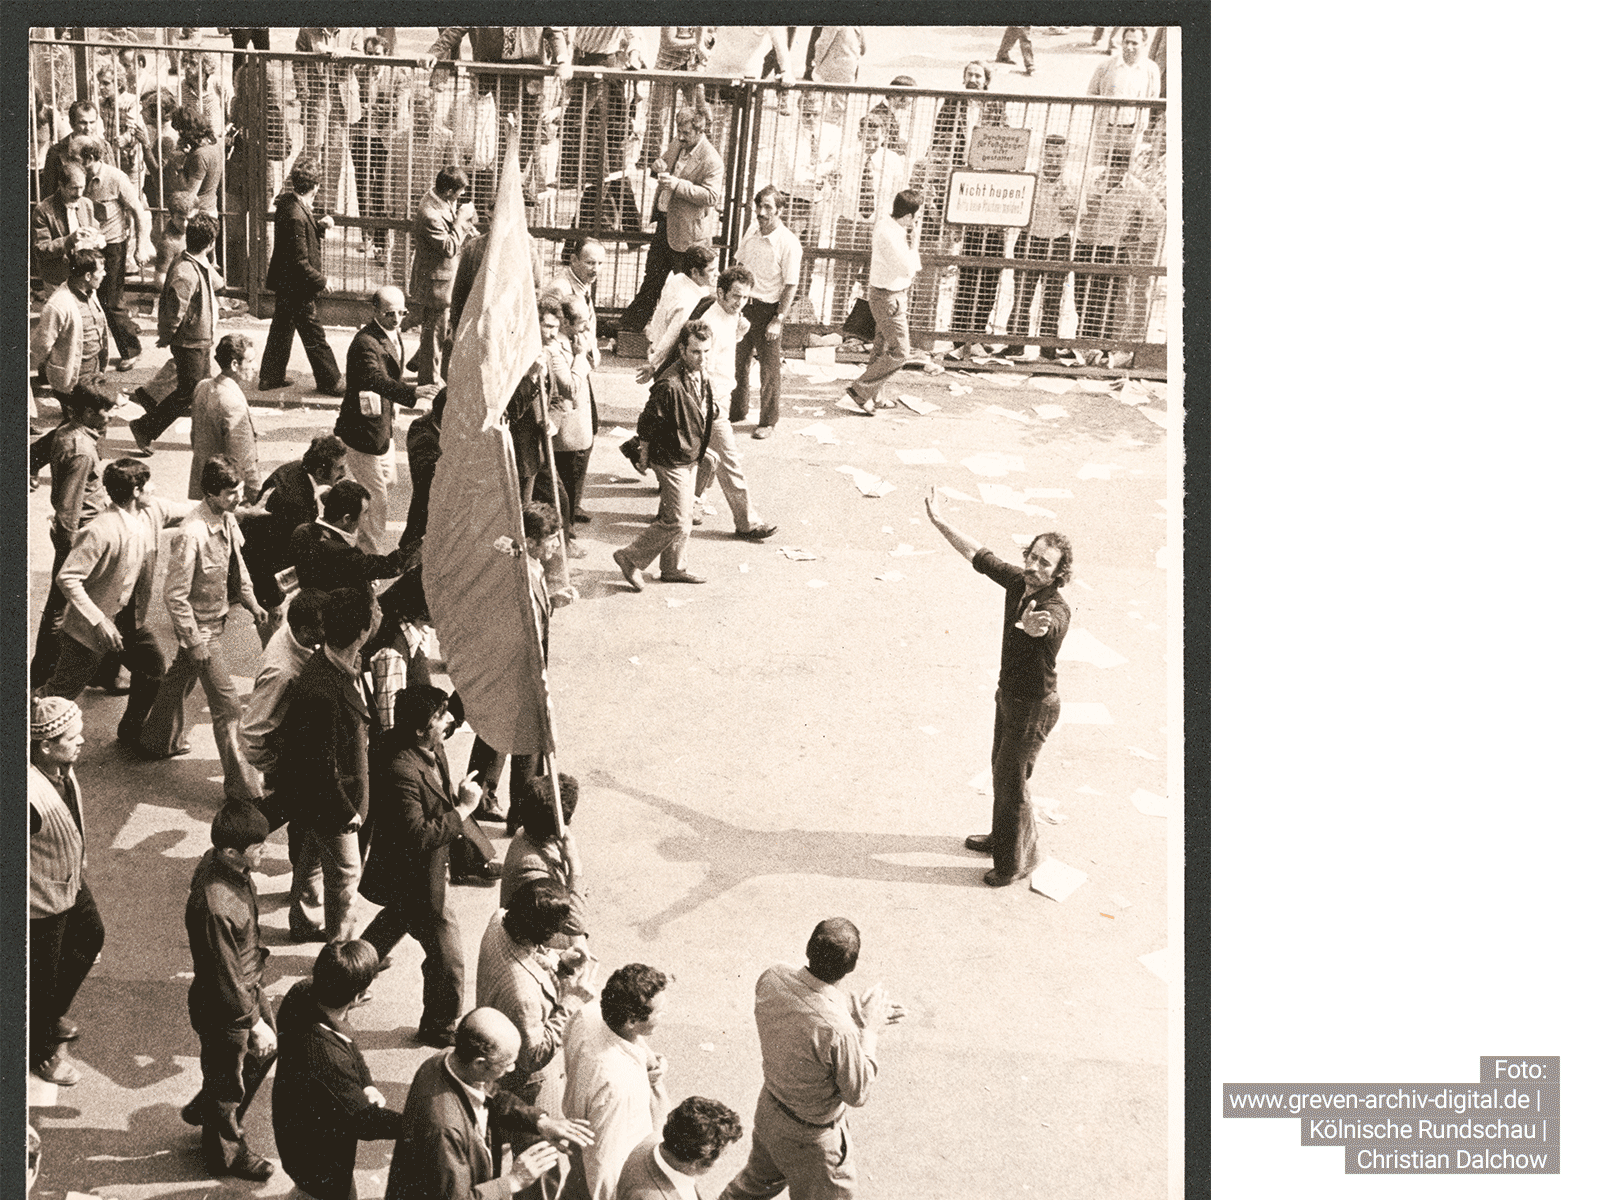 Just one week after Baha Türgun started working at Ford, the role of strike leader fell to him. On August 29, 1973, he orchestrated this demonstration march at the plant. Photo: www.greven-archiv-digital.de | Kölnische Rundschau | Christian Dalchow